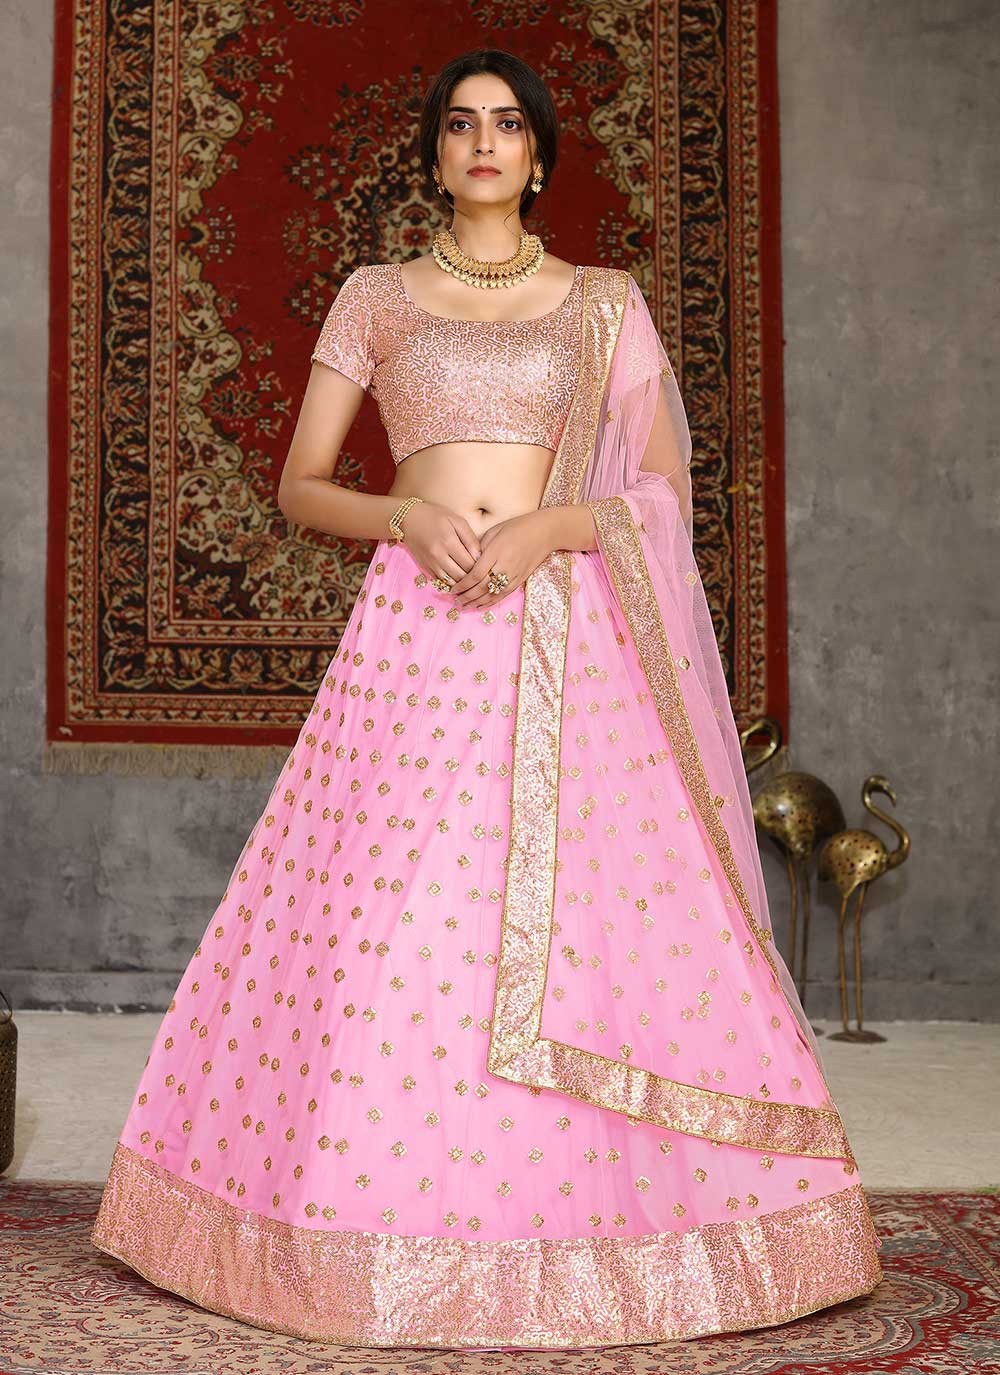 Pink Party Lehenga - Buy Pink Party Lehenga Online at Best Prices